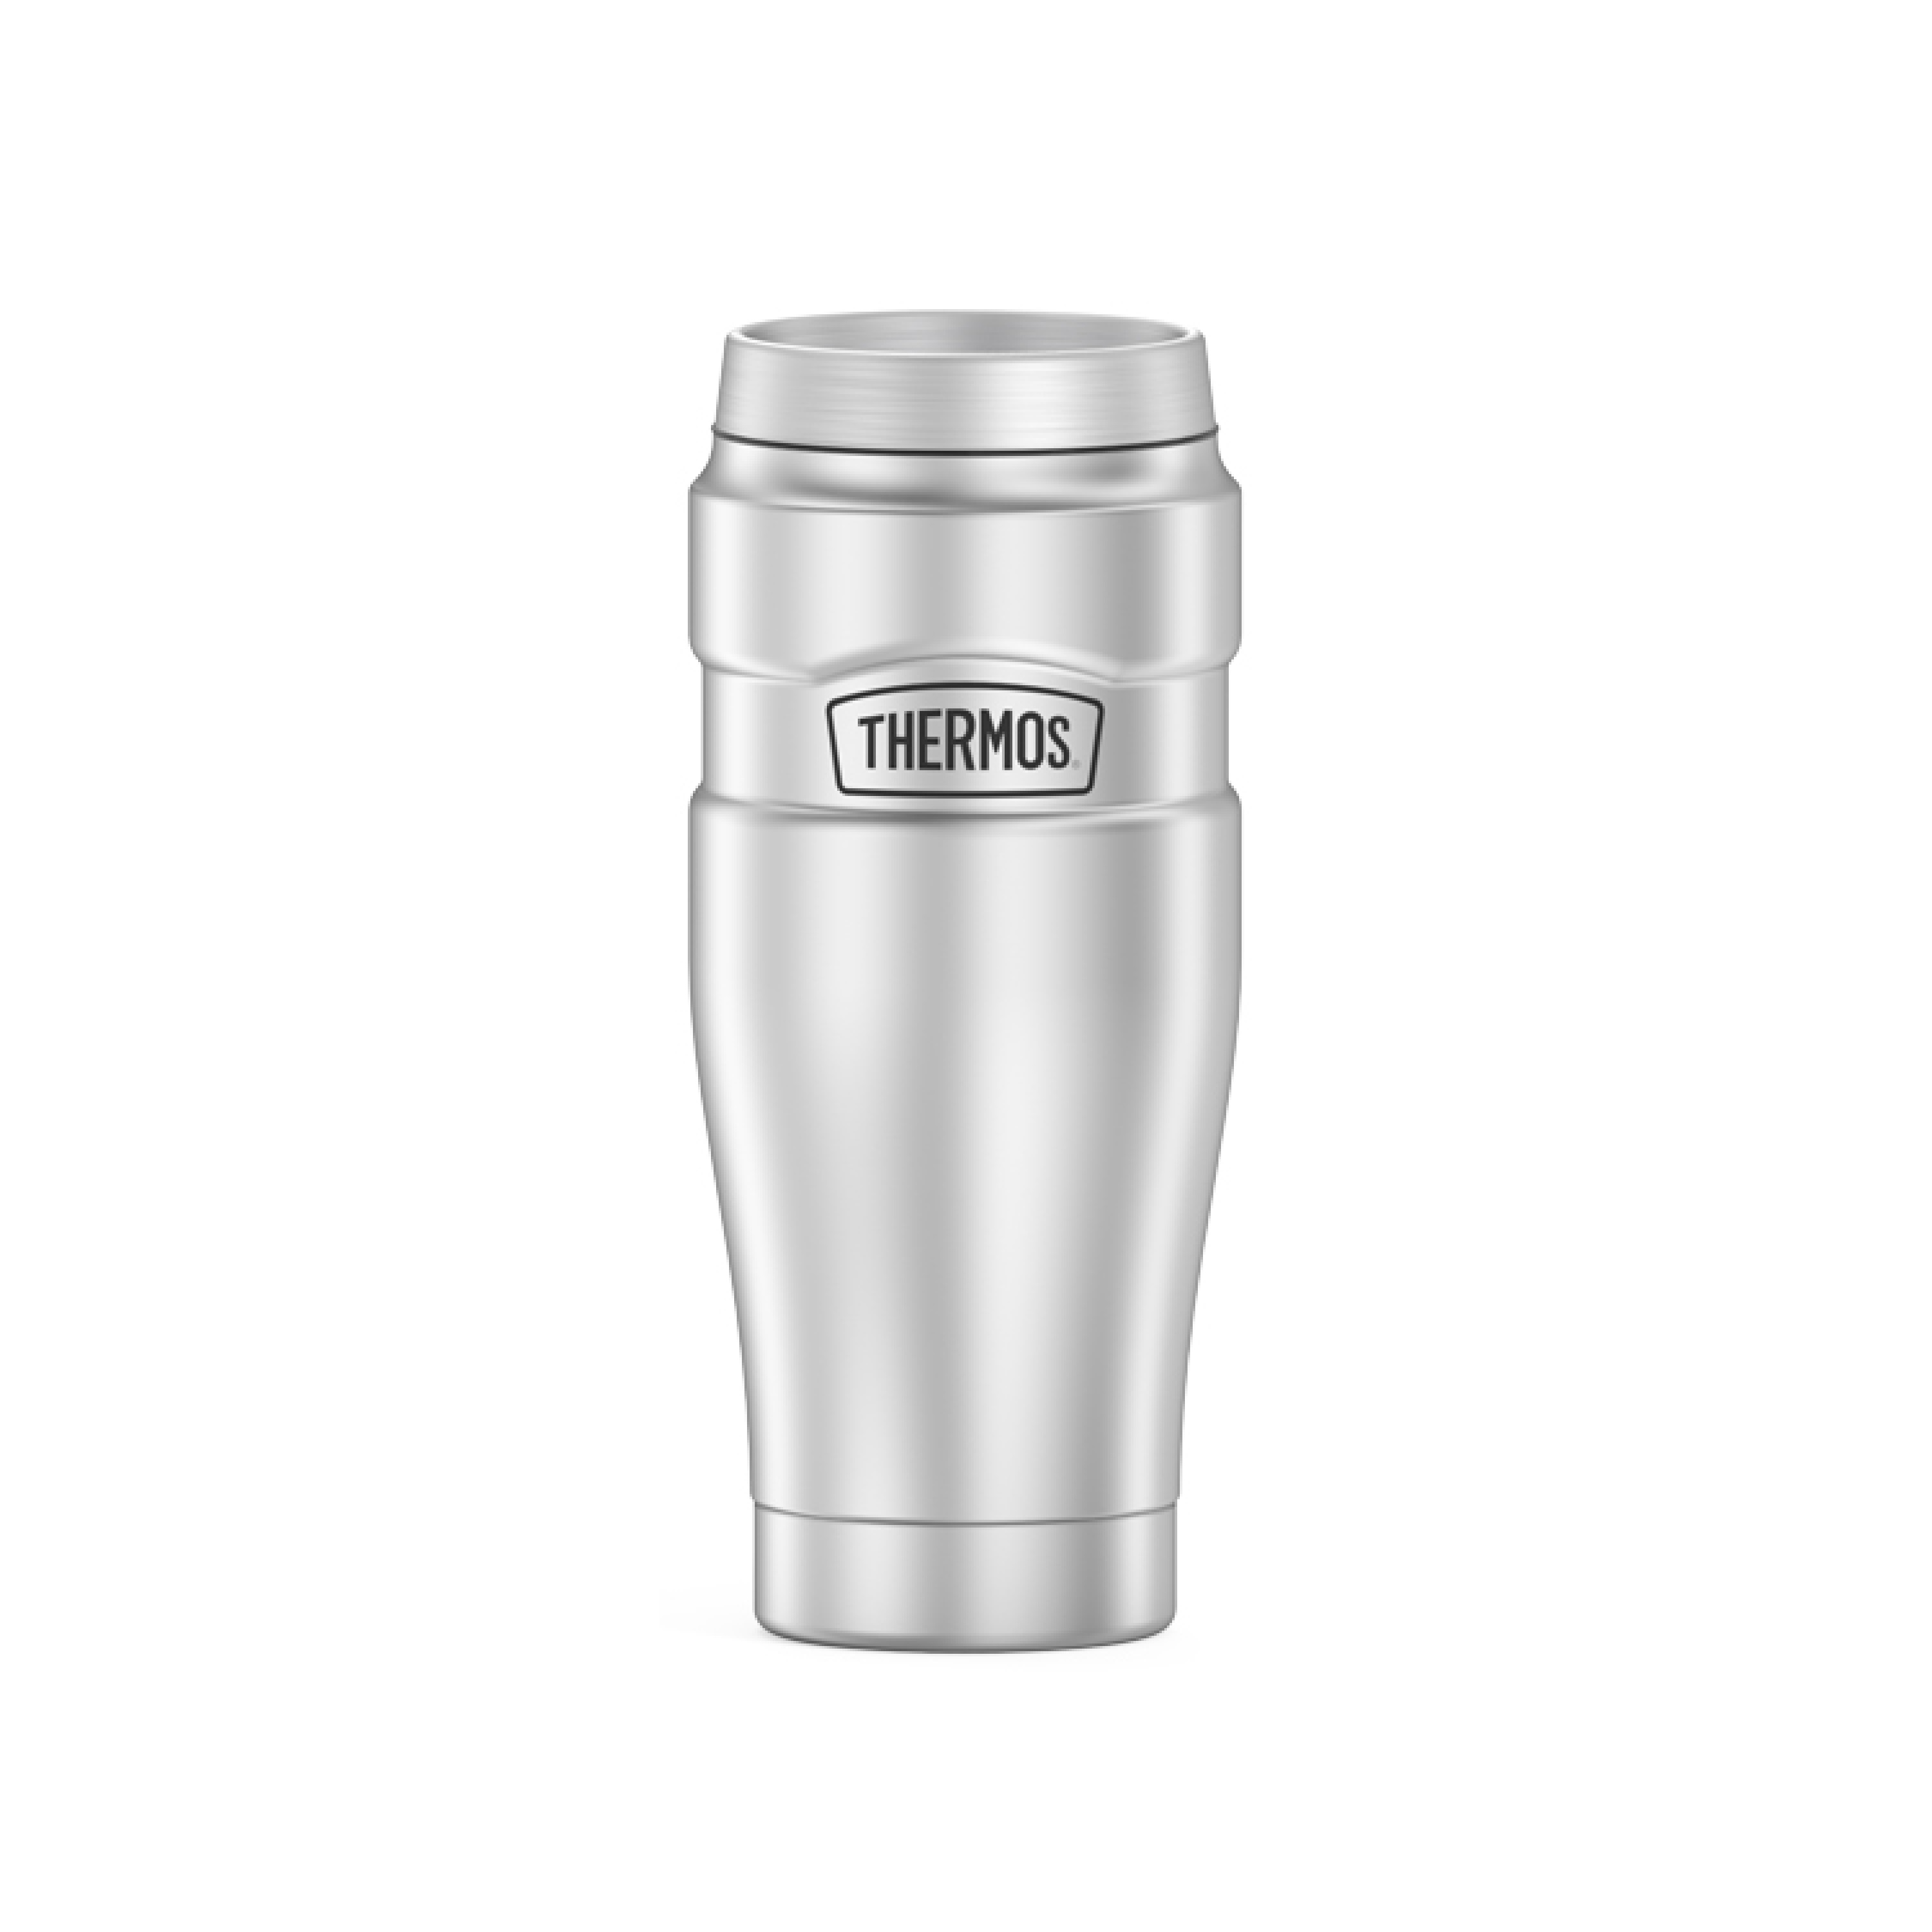 Thermos 16 Stainless King Vacuum Insulated Stainless Steel Coffee Mug ユニセックス  コーヒー・お茶用品